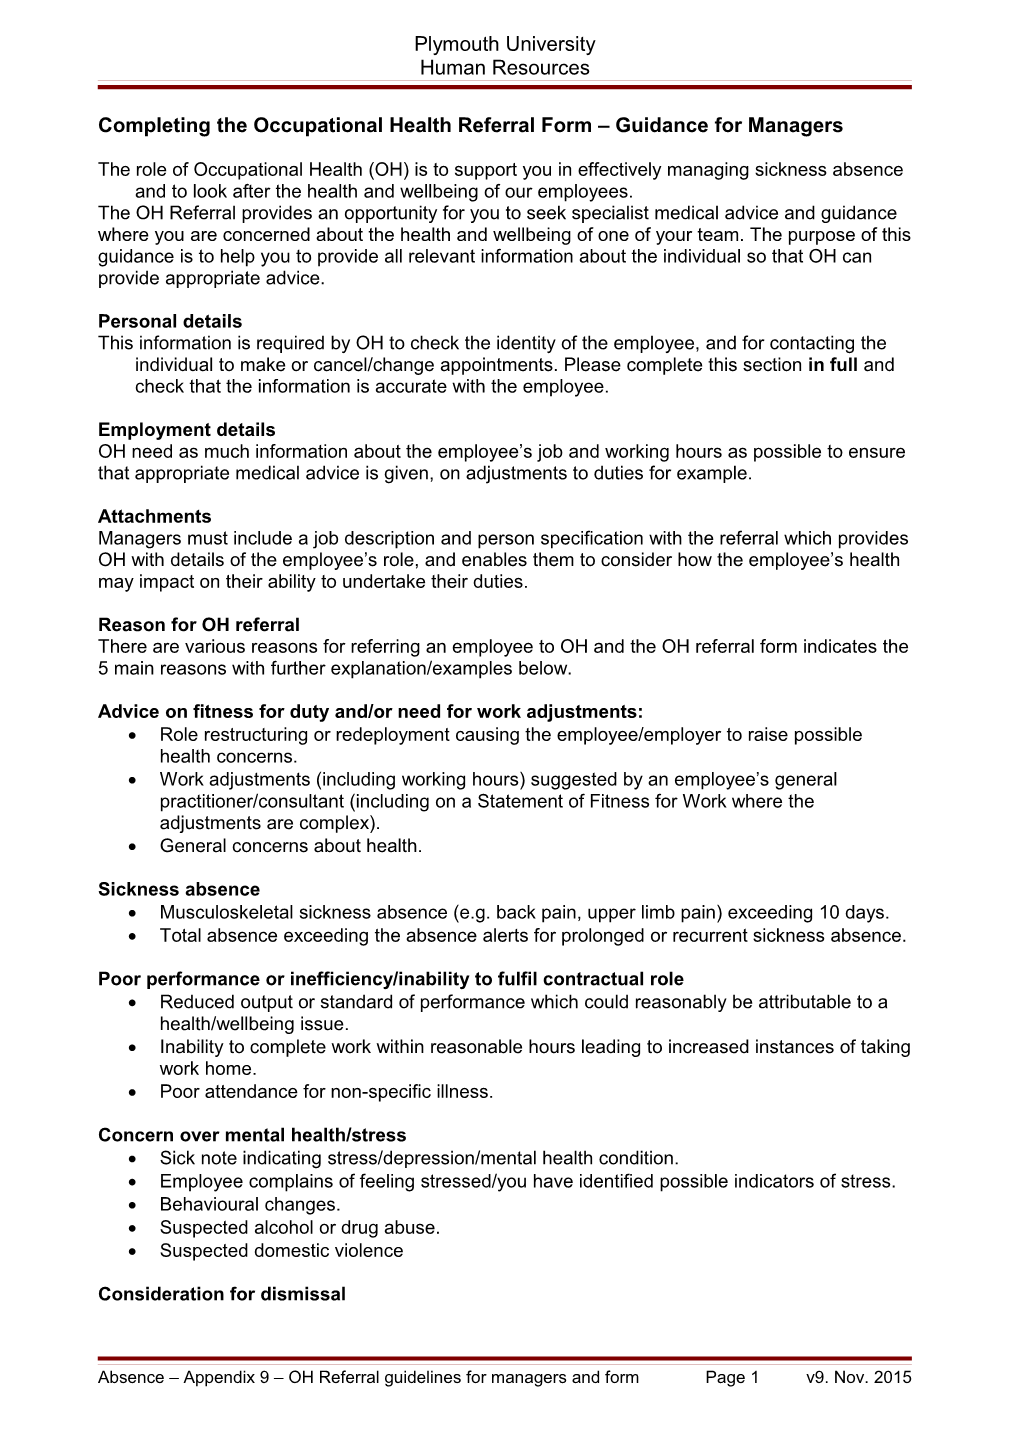 Absence - Appendix 9 Occupational Health Referral Guidelines and Form